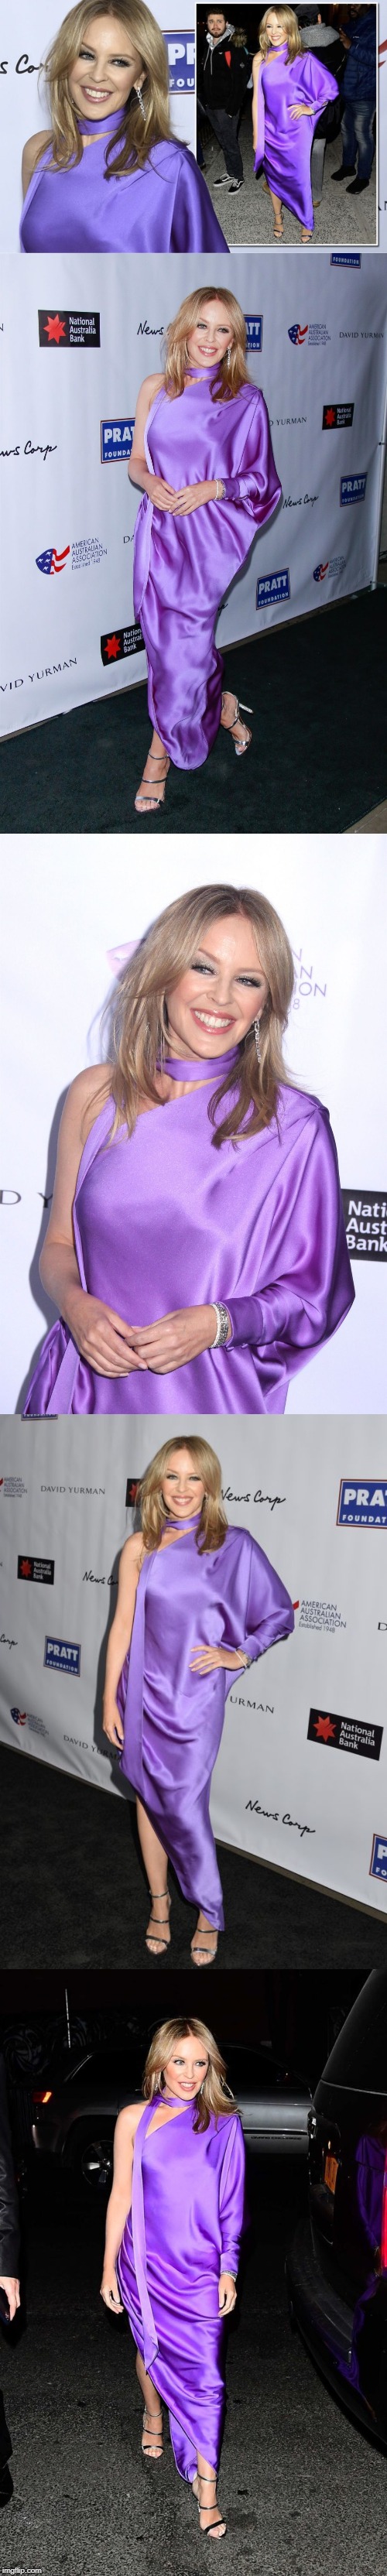 Supporting Australian bushfire relief efforts at the AAA Arts Awards Gala in New York, 1/30/20. | image tagged in celebrity,style,dress,wildfires,charity,australia | made w/ Imgflip meme maker